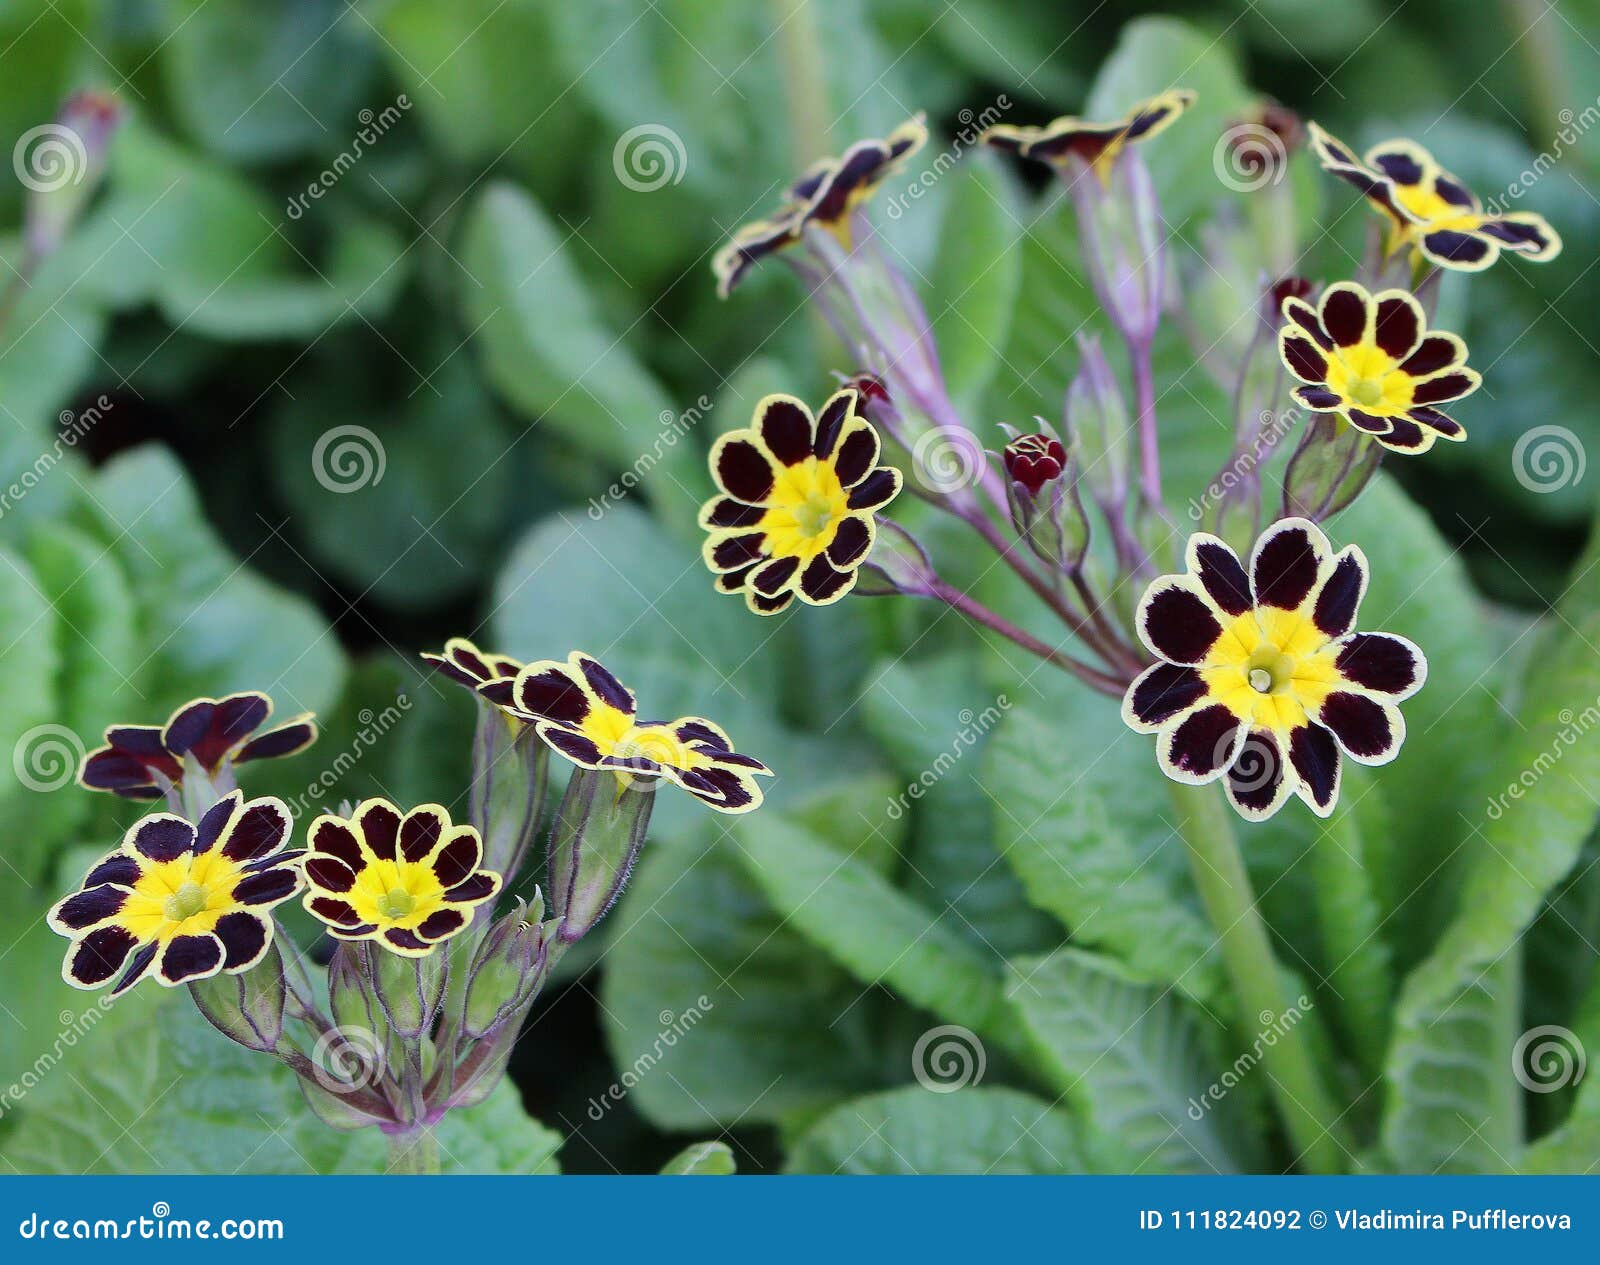 primula sp. - interesting variety of favourite spring flower